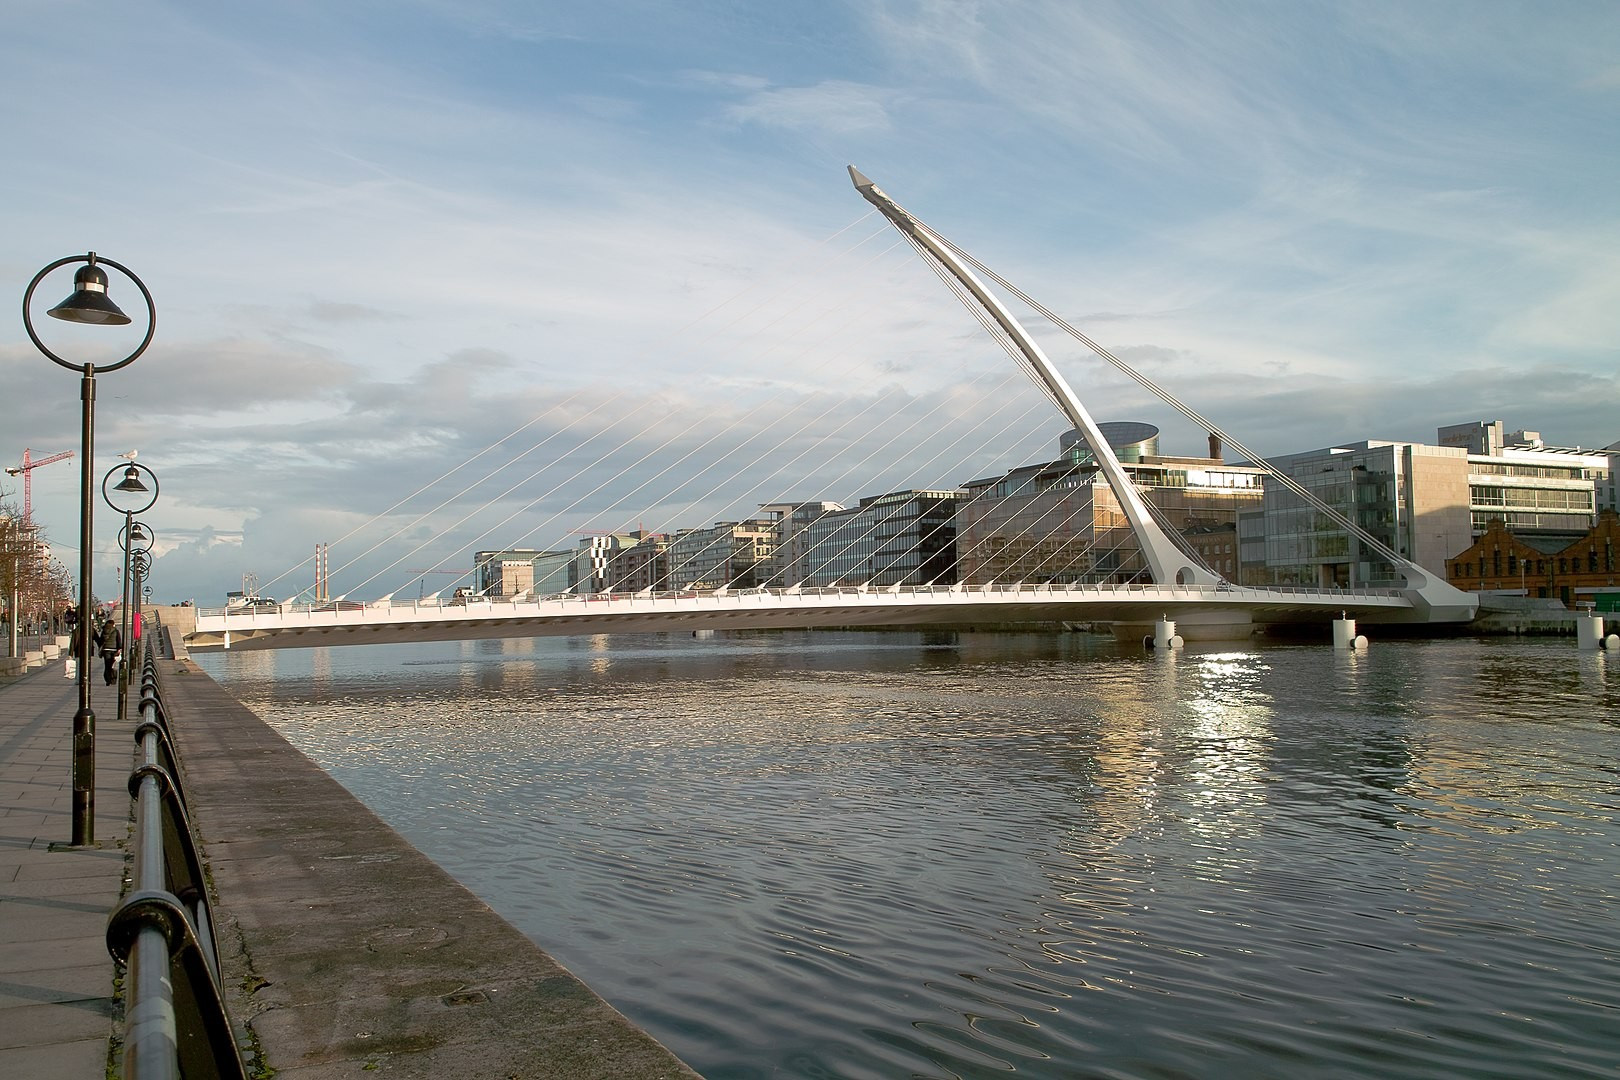 De William Murphy - originally posted to Flickr as The Samuel Beckett Bridge, CC BY-SA 2.0, https://commons.wikimedia.org/w/index.php?curid=11931083